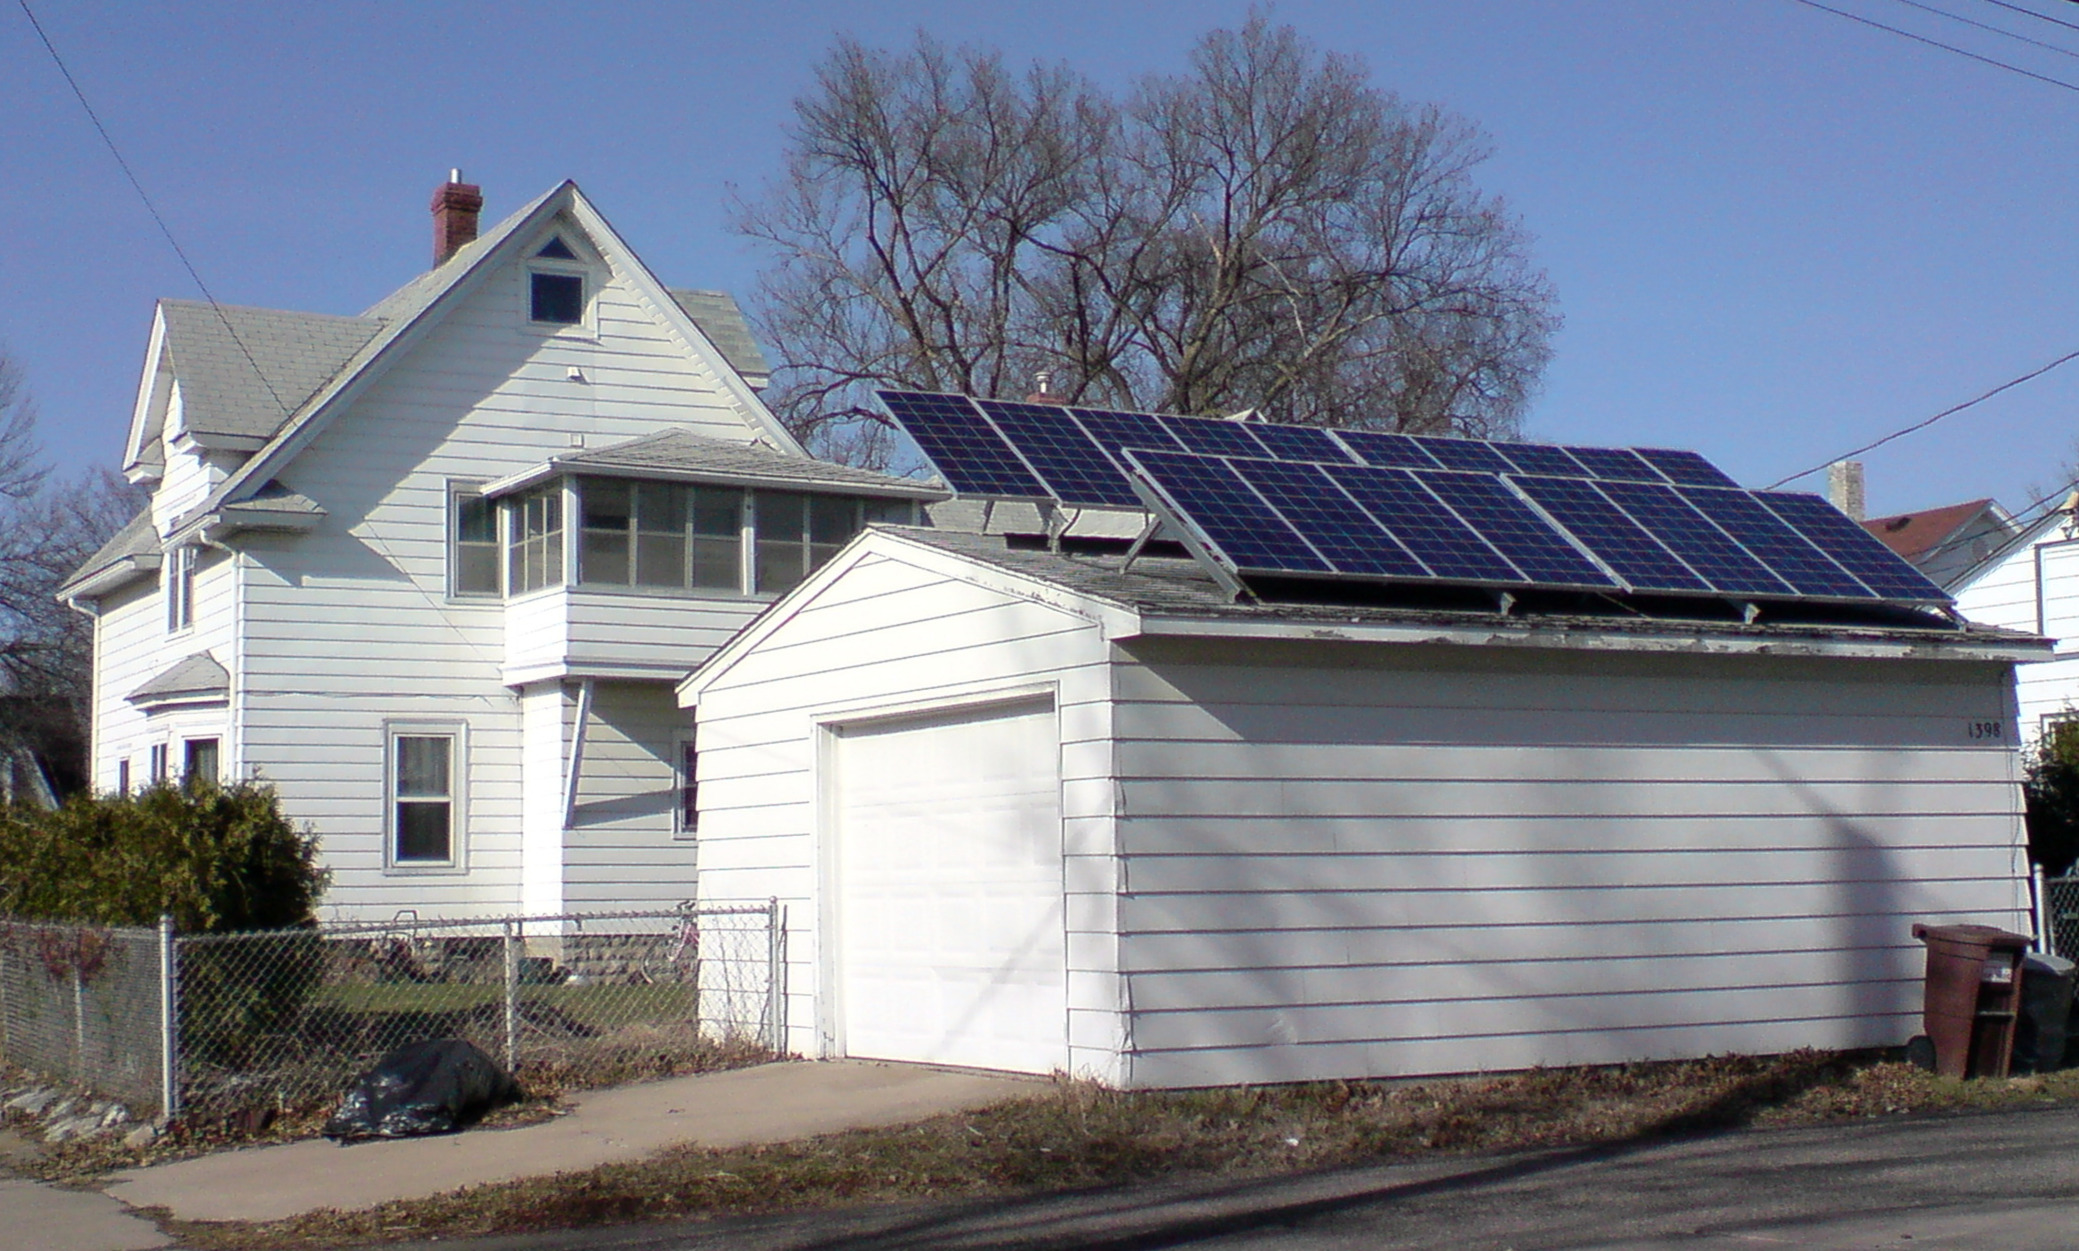 Minnesota solar rebate extension gives installers longer runway to reach lower-income customers